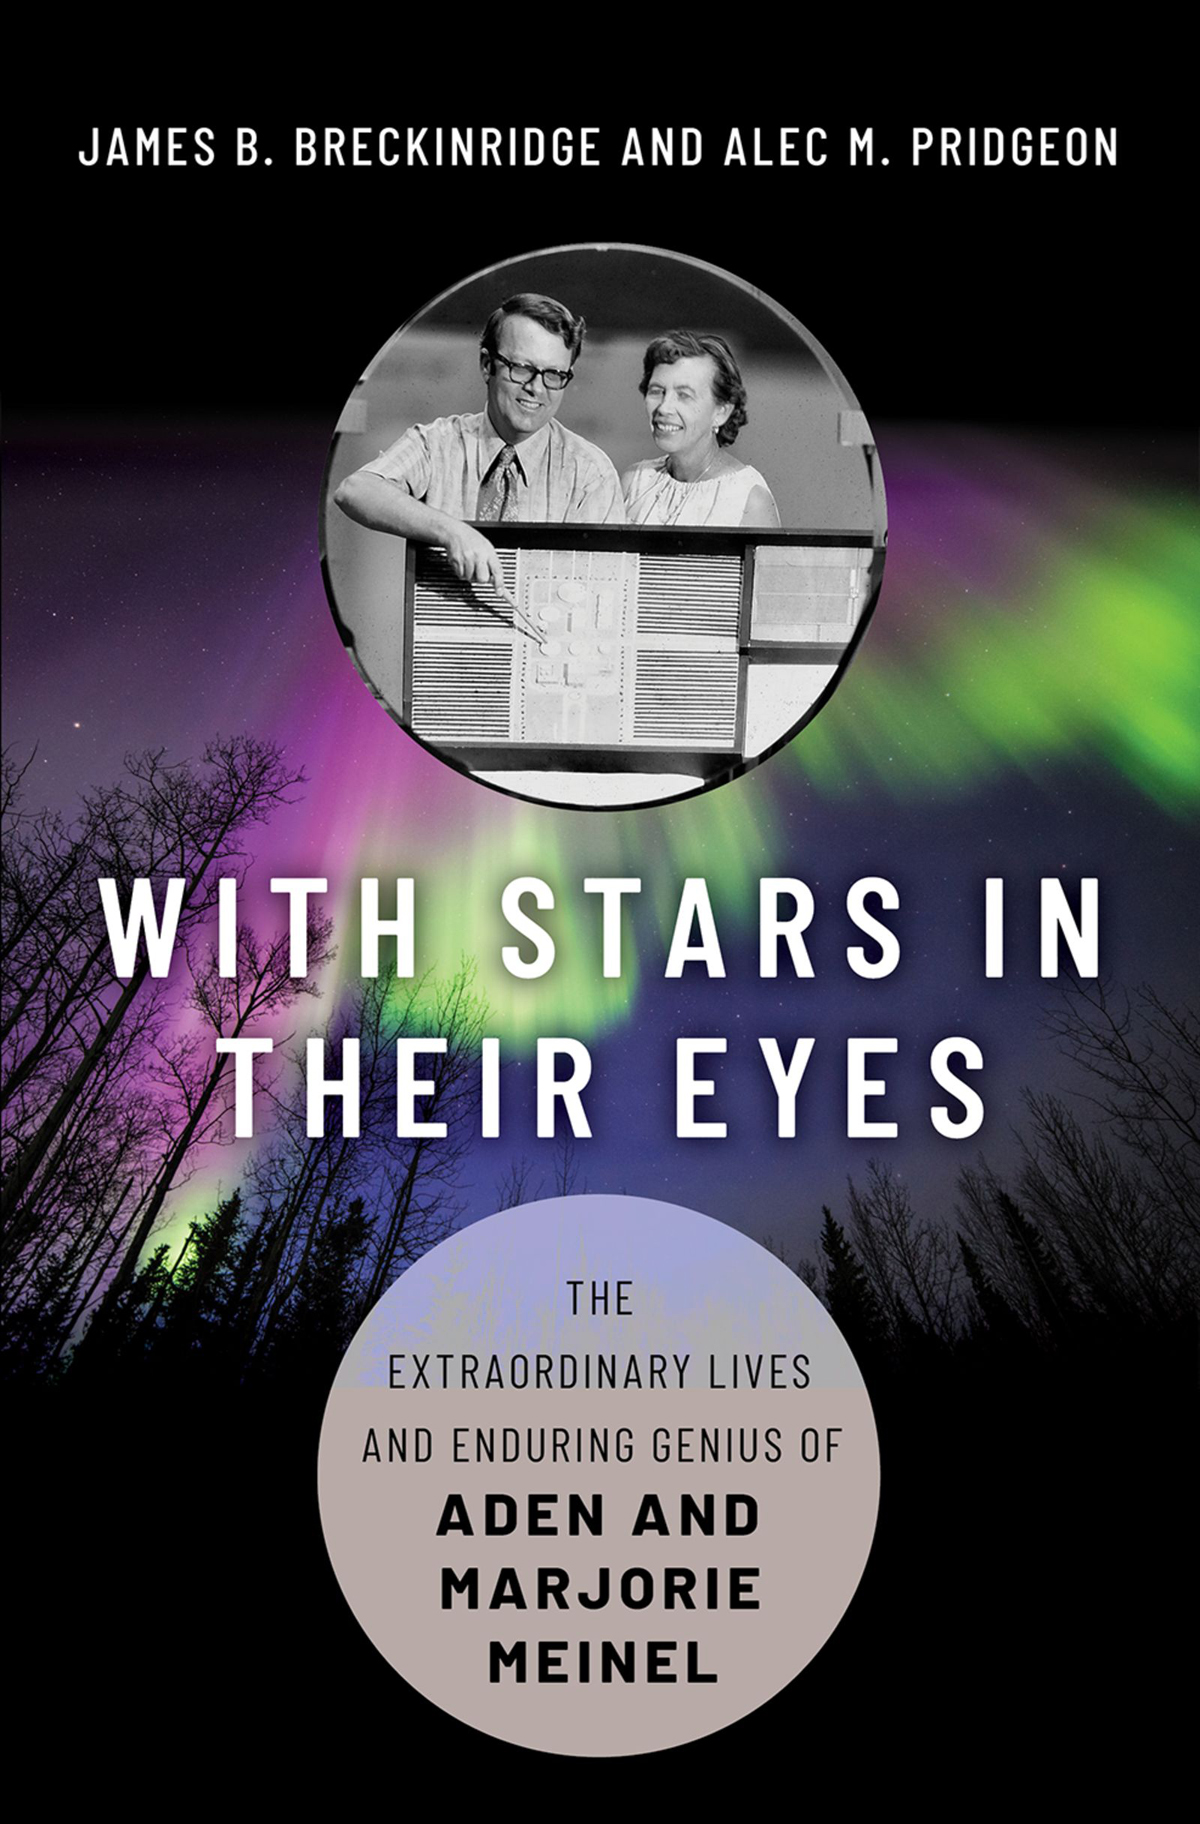 With Stars in Their Eyes The Extraordinary Lives and Enduring Genius of Aden and Marjorie Meinel - image 1